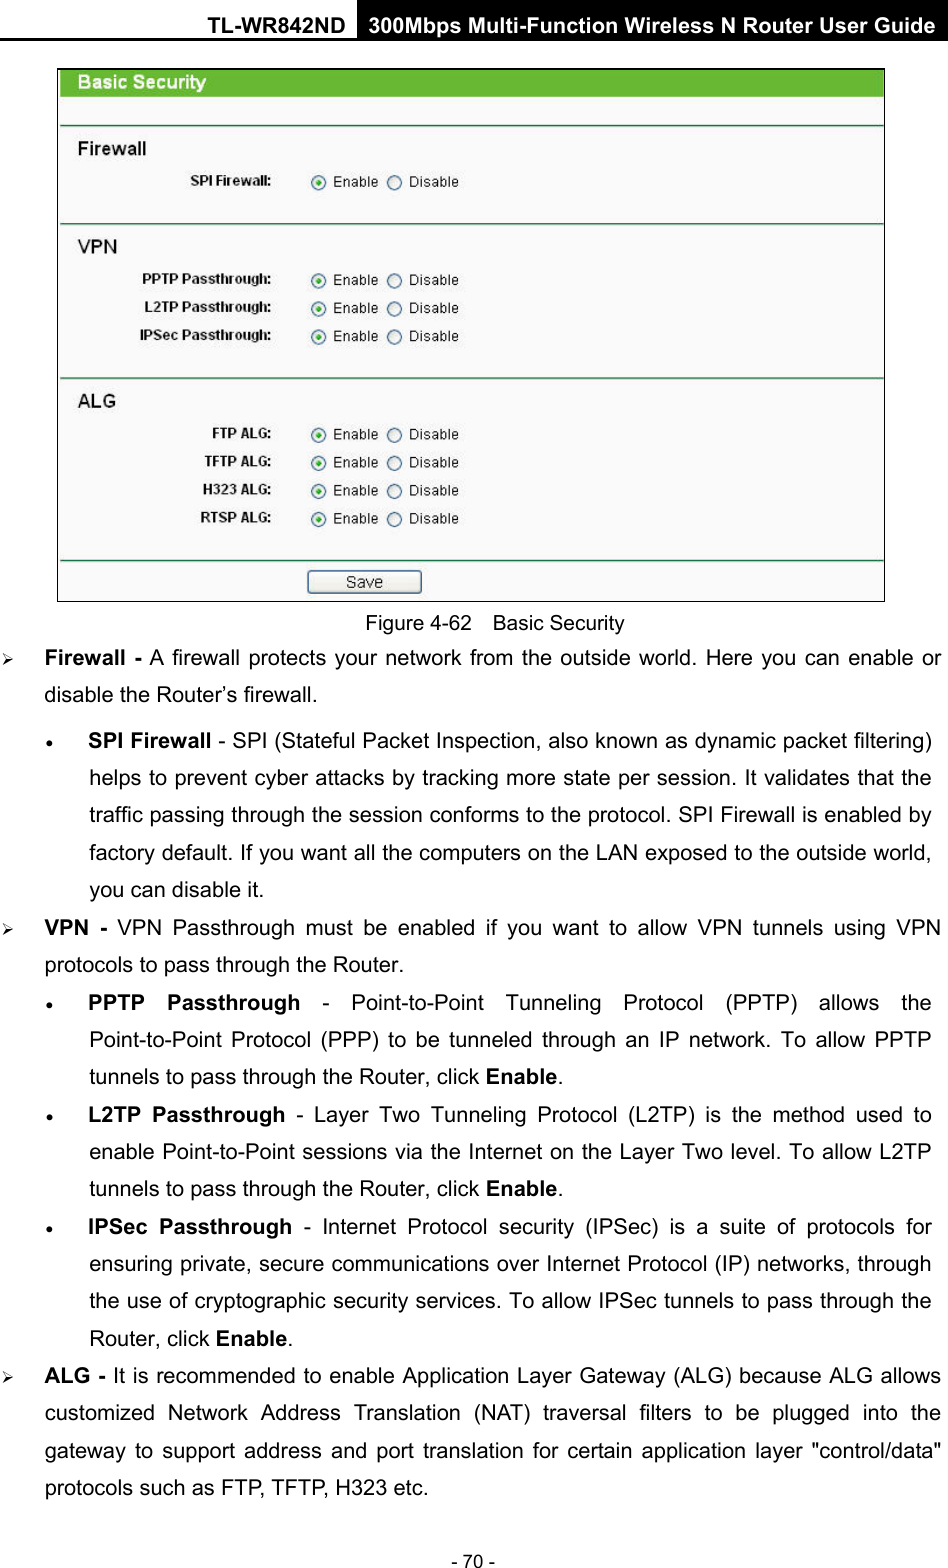 TL-WR842ND 300Mbps Multi-Function Wireless N Router User Guide  - 70 -  Figure 4-62  Basic Security  Firewall - A firewall protects your network from the outside world. Here you can enable or disable the Router’s firewall. • SPI Firewall - SPI (Stateful Packet Inspection, also known as dynamic packet filtering) helps to prevent cyber attacks by tracking more state per session. It validates that the traffic passing through the session conforms to the protocol. SPI Firewall is enabled by factory default. If you want all the computers on the LAN exposed to the outside world, you can disable it.    VPN  -  VPN Passthrough must be enabled if you want to allow VPN tunnels using VPN protocols to pass through the Router. • PPTP Passthrough - Point-to-Point Tunneling Protocol (PPTP) allows the Point-to-Point Protocol (PPP) to be tunneled through an IP network. To allow PPTP tunnels to pass through the Router, click Enable. • L2TP Passthrough - Layer Two Tunneling Protocol (L2TP) is the method used to enable Point-to-Point sessions via the Internet on the Layer Two level. To allow L2TP tunnels to pass through the Router, click Enable. • IPSec Passthrough  -  Internet Protocol security (IPSec) is a suite of protocols for ensuring private, secure communications over Internet Protocol (IP) networks, through the use of cryptographic security services. To allow IPSec tunnels to pass through the Router, click Enable.  ALG - It is recommended to enable Application Layer Gateway (ALG) because ALG allows customized Network Address Translation (NAT) traversal filters to be plugged into the gateway to support address and port translation for certain application layer &quot;control/data&quot; protocols such as FTP, TFTP, H323 etc.   